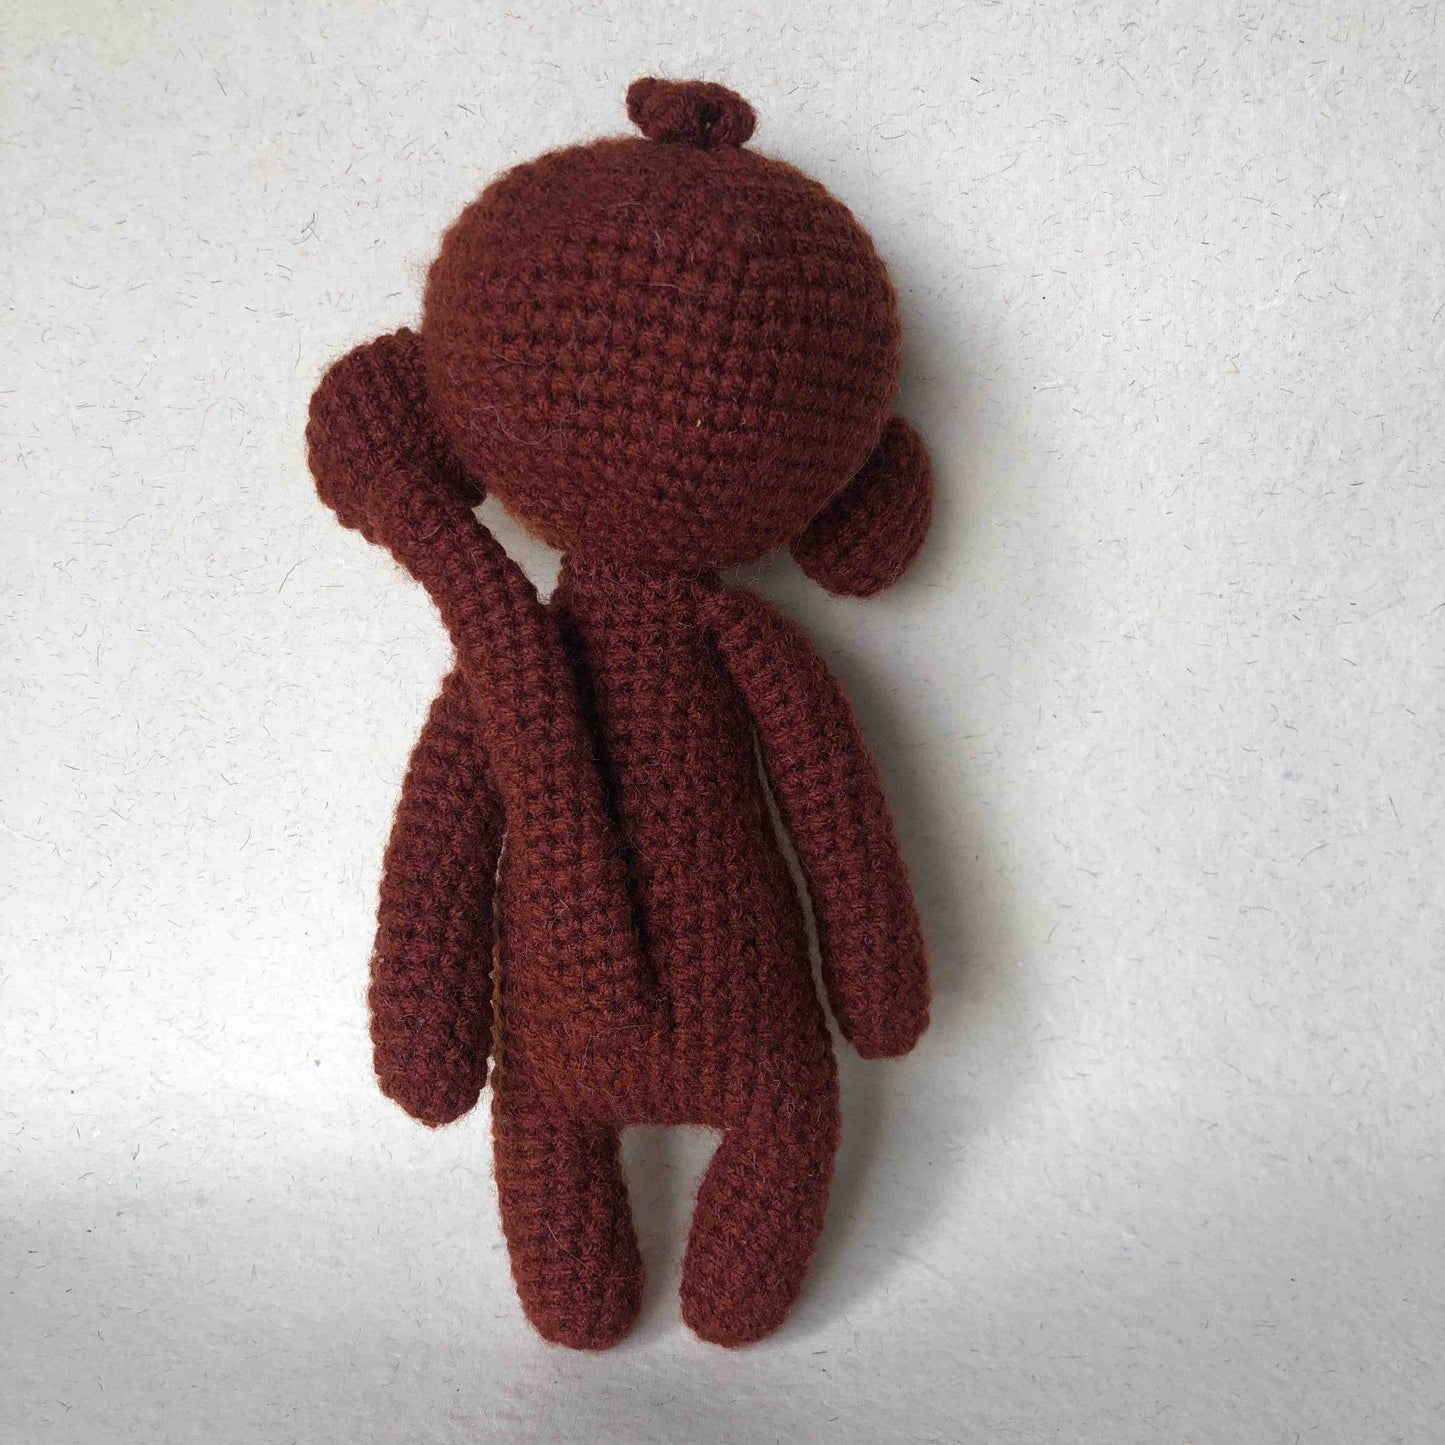 Naughty Monkey Crochet Toy - Magical Beings